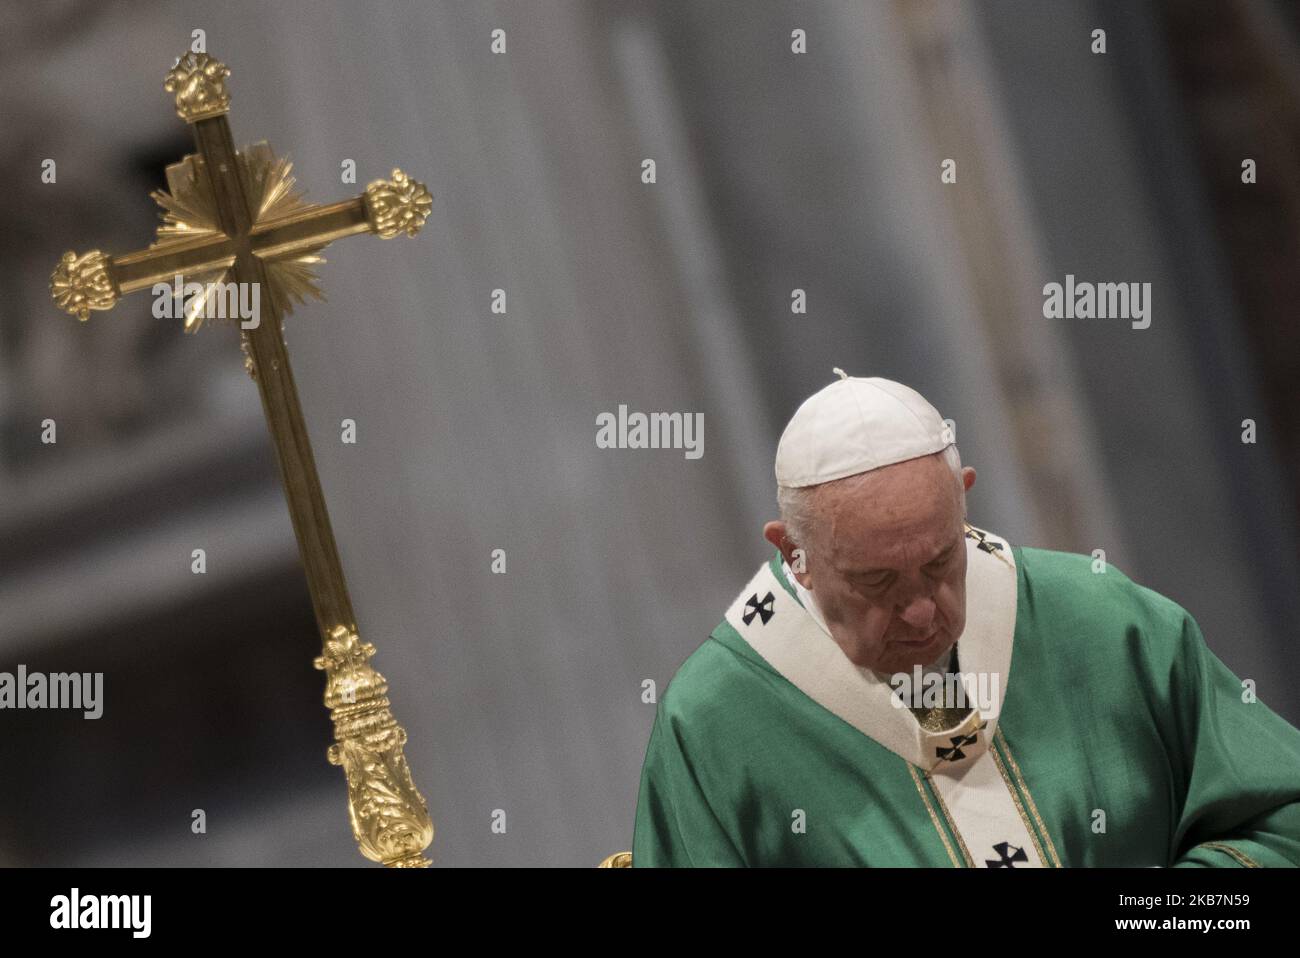 Pope Francis celebrates an opening Mass for the Amazon synod, in St. Peter's Basilica, at the Vatican, Sunday, Oct. 6, 2019. Pope Francis is opening a divisive meeting on preserving the Amazon and ministering to its indigenous peoples, as he fends off attacks from conservatives who are opposed to his ecological agenda. (Photo by Massimo Valicchia/NurPhoto) Stock Photo